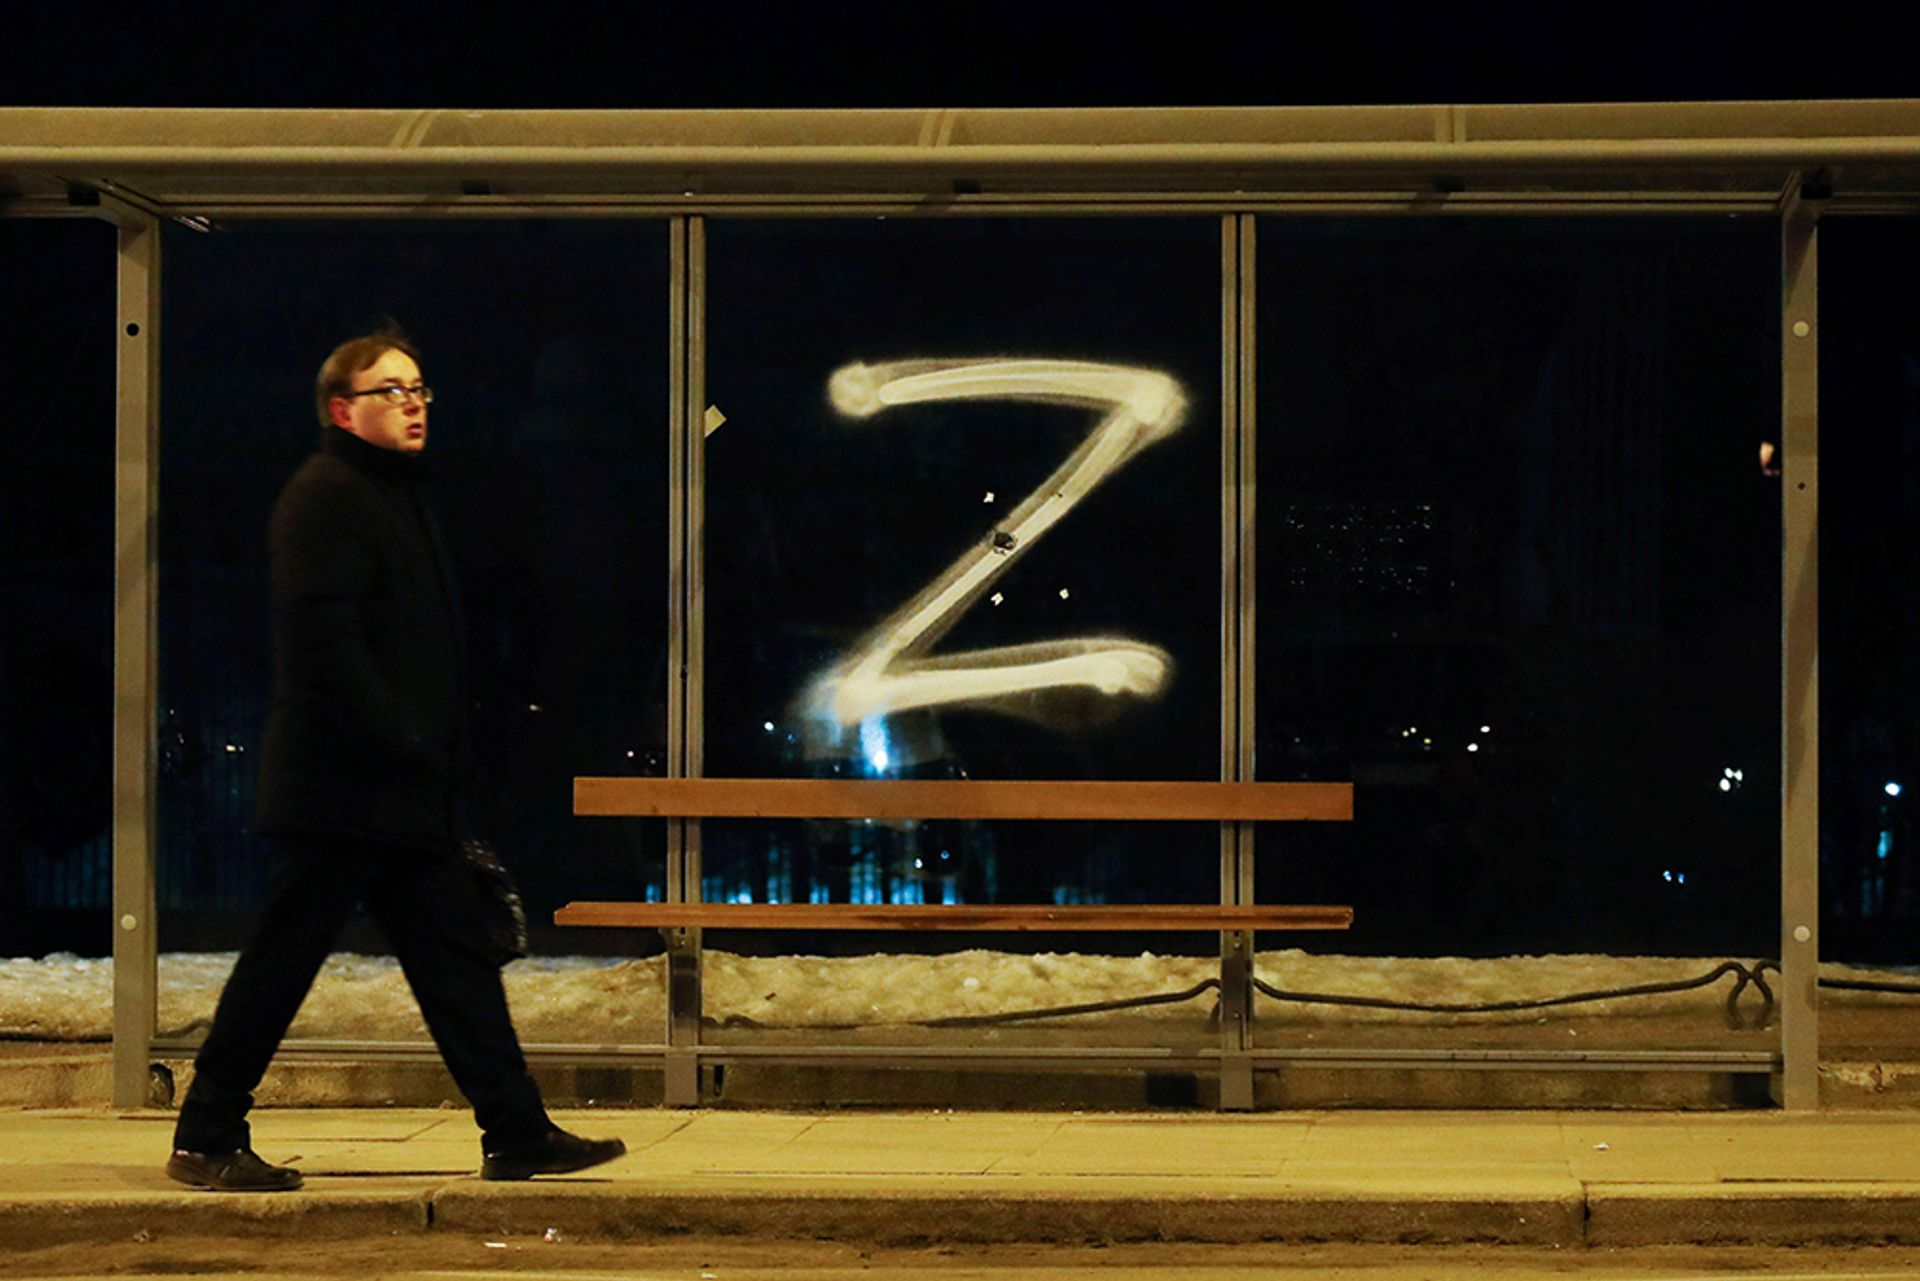 The symbol "Z" in support of Russian troops has appeared on bus stops, tanks and pro-Russia demonstrations © Reuters/Staff